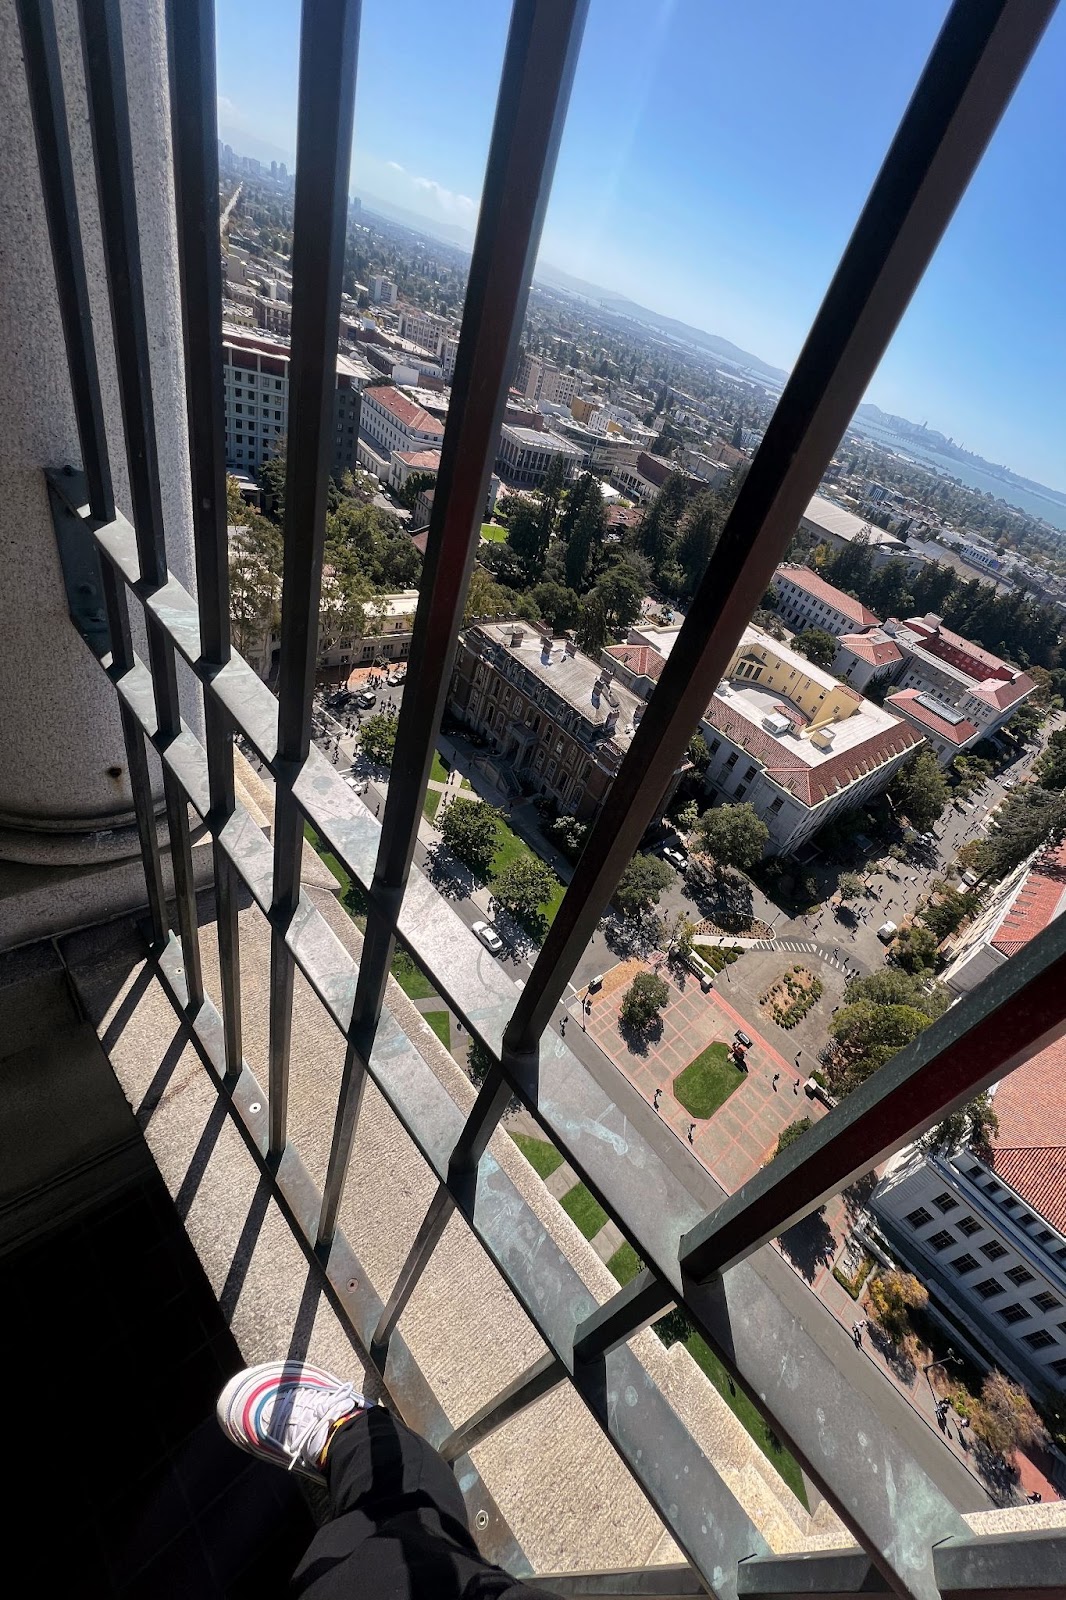 A first-person view looking down at shoes. The person is atop. a railing in Sather Tower.